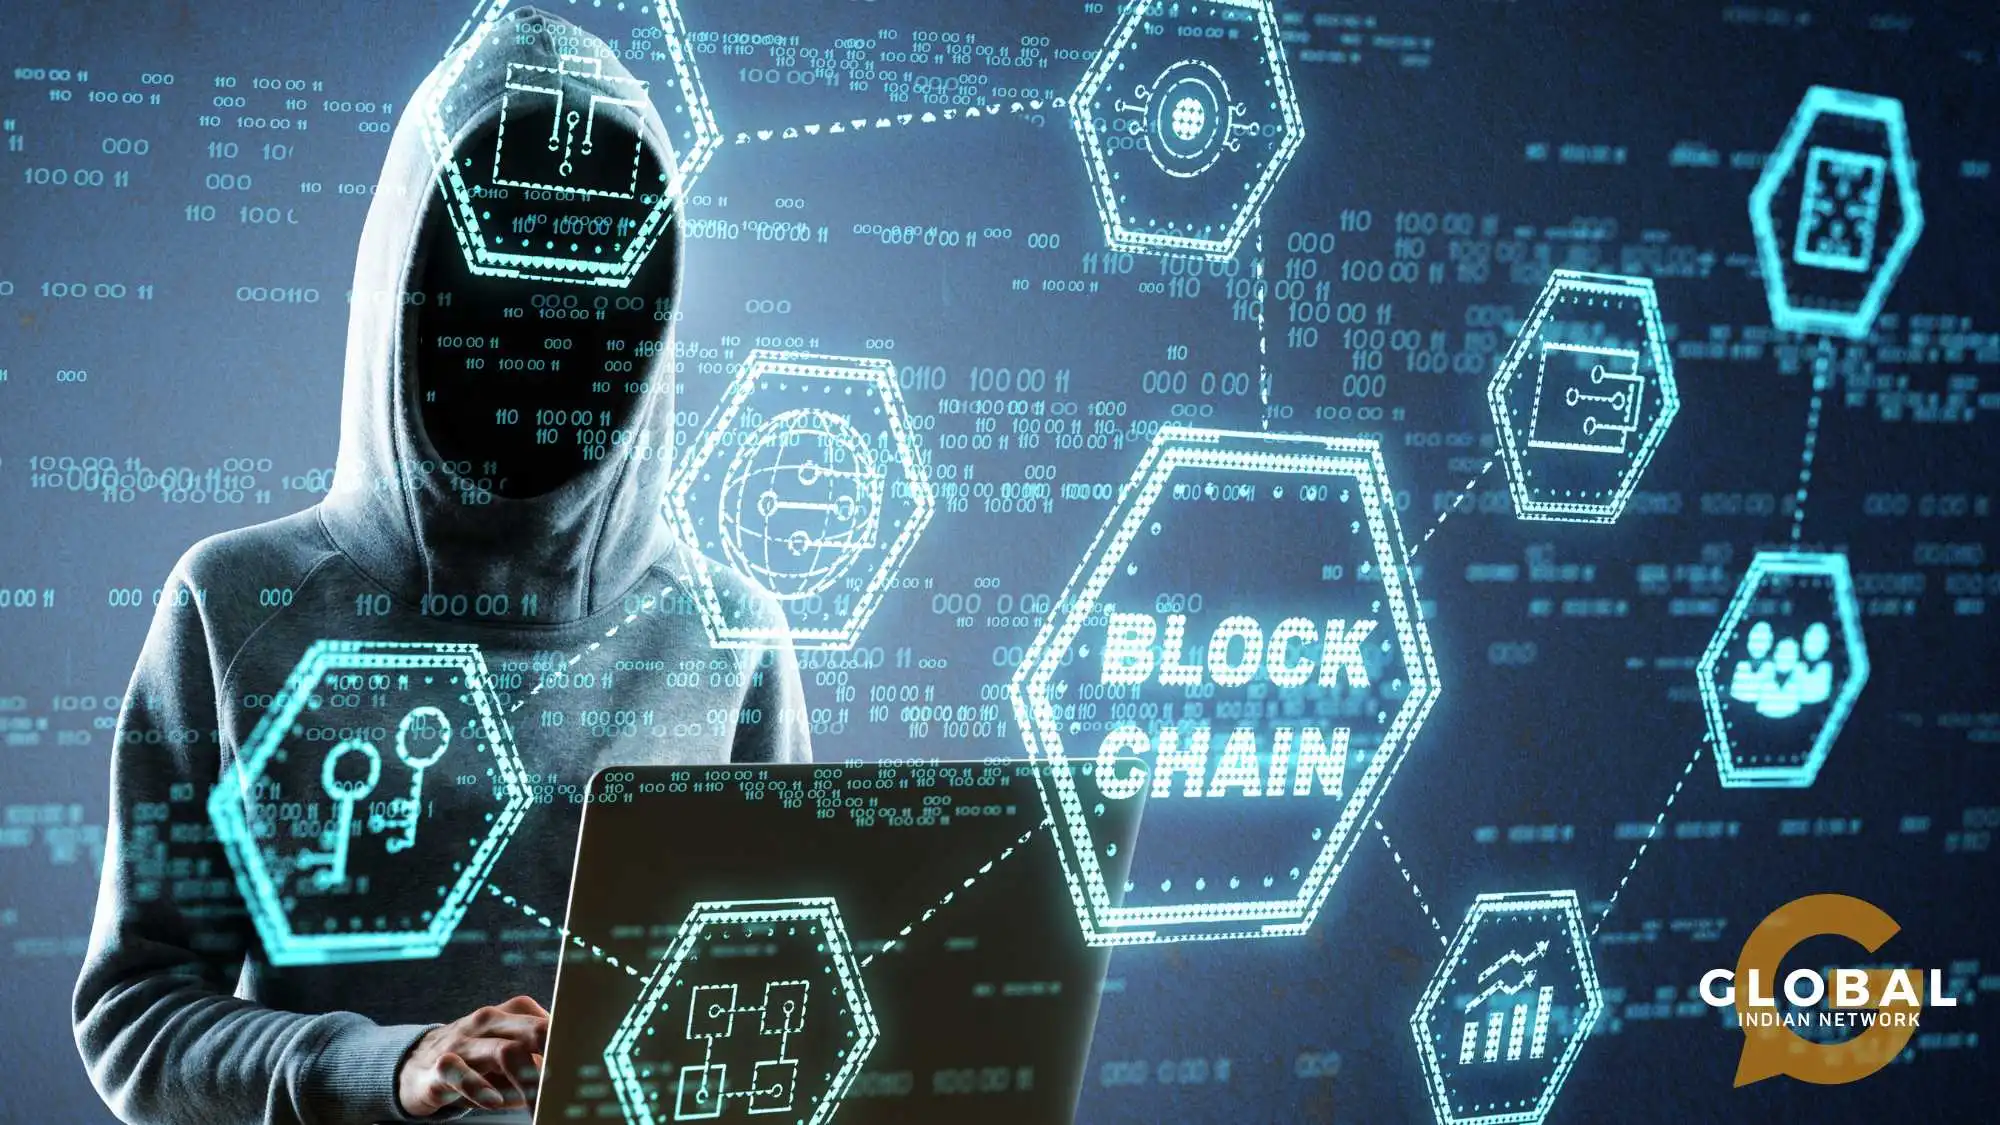 what is an advantage of using blockchain technology